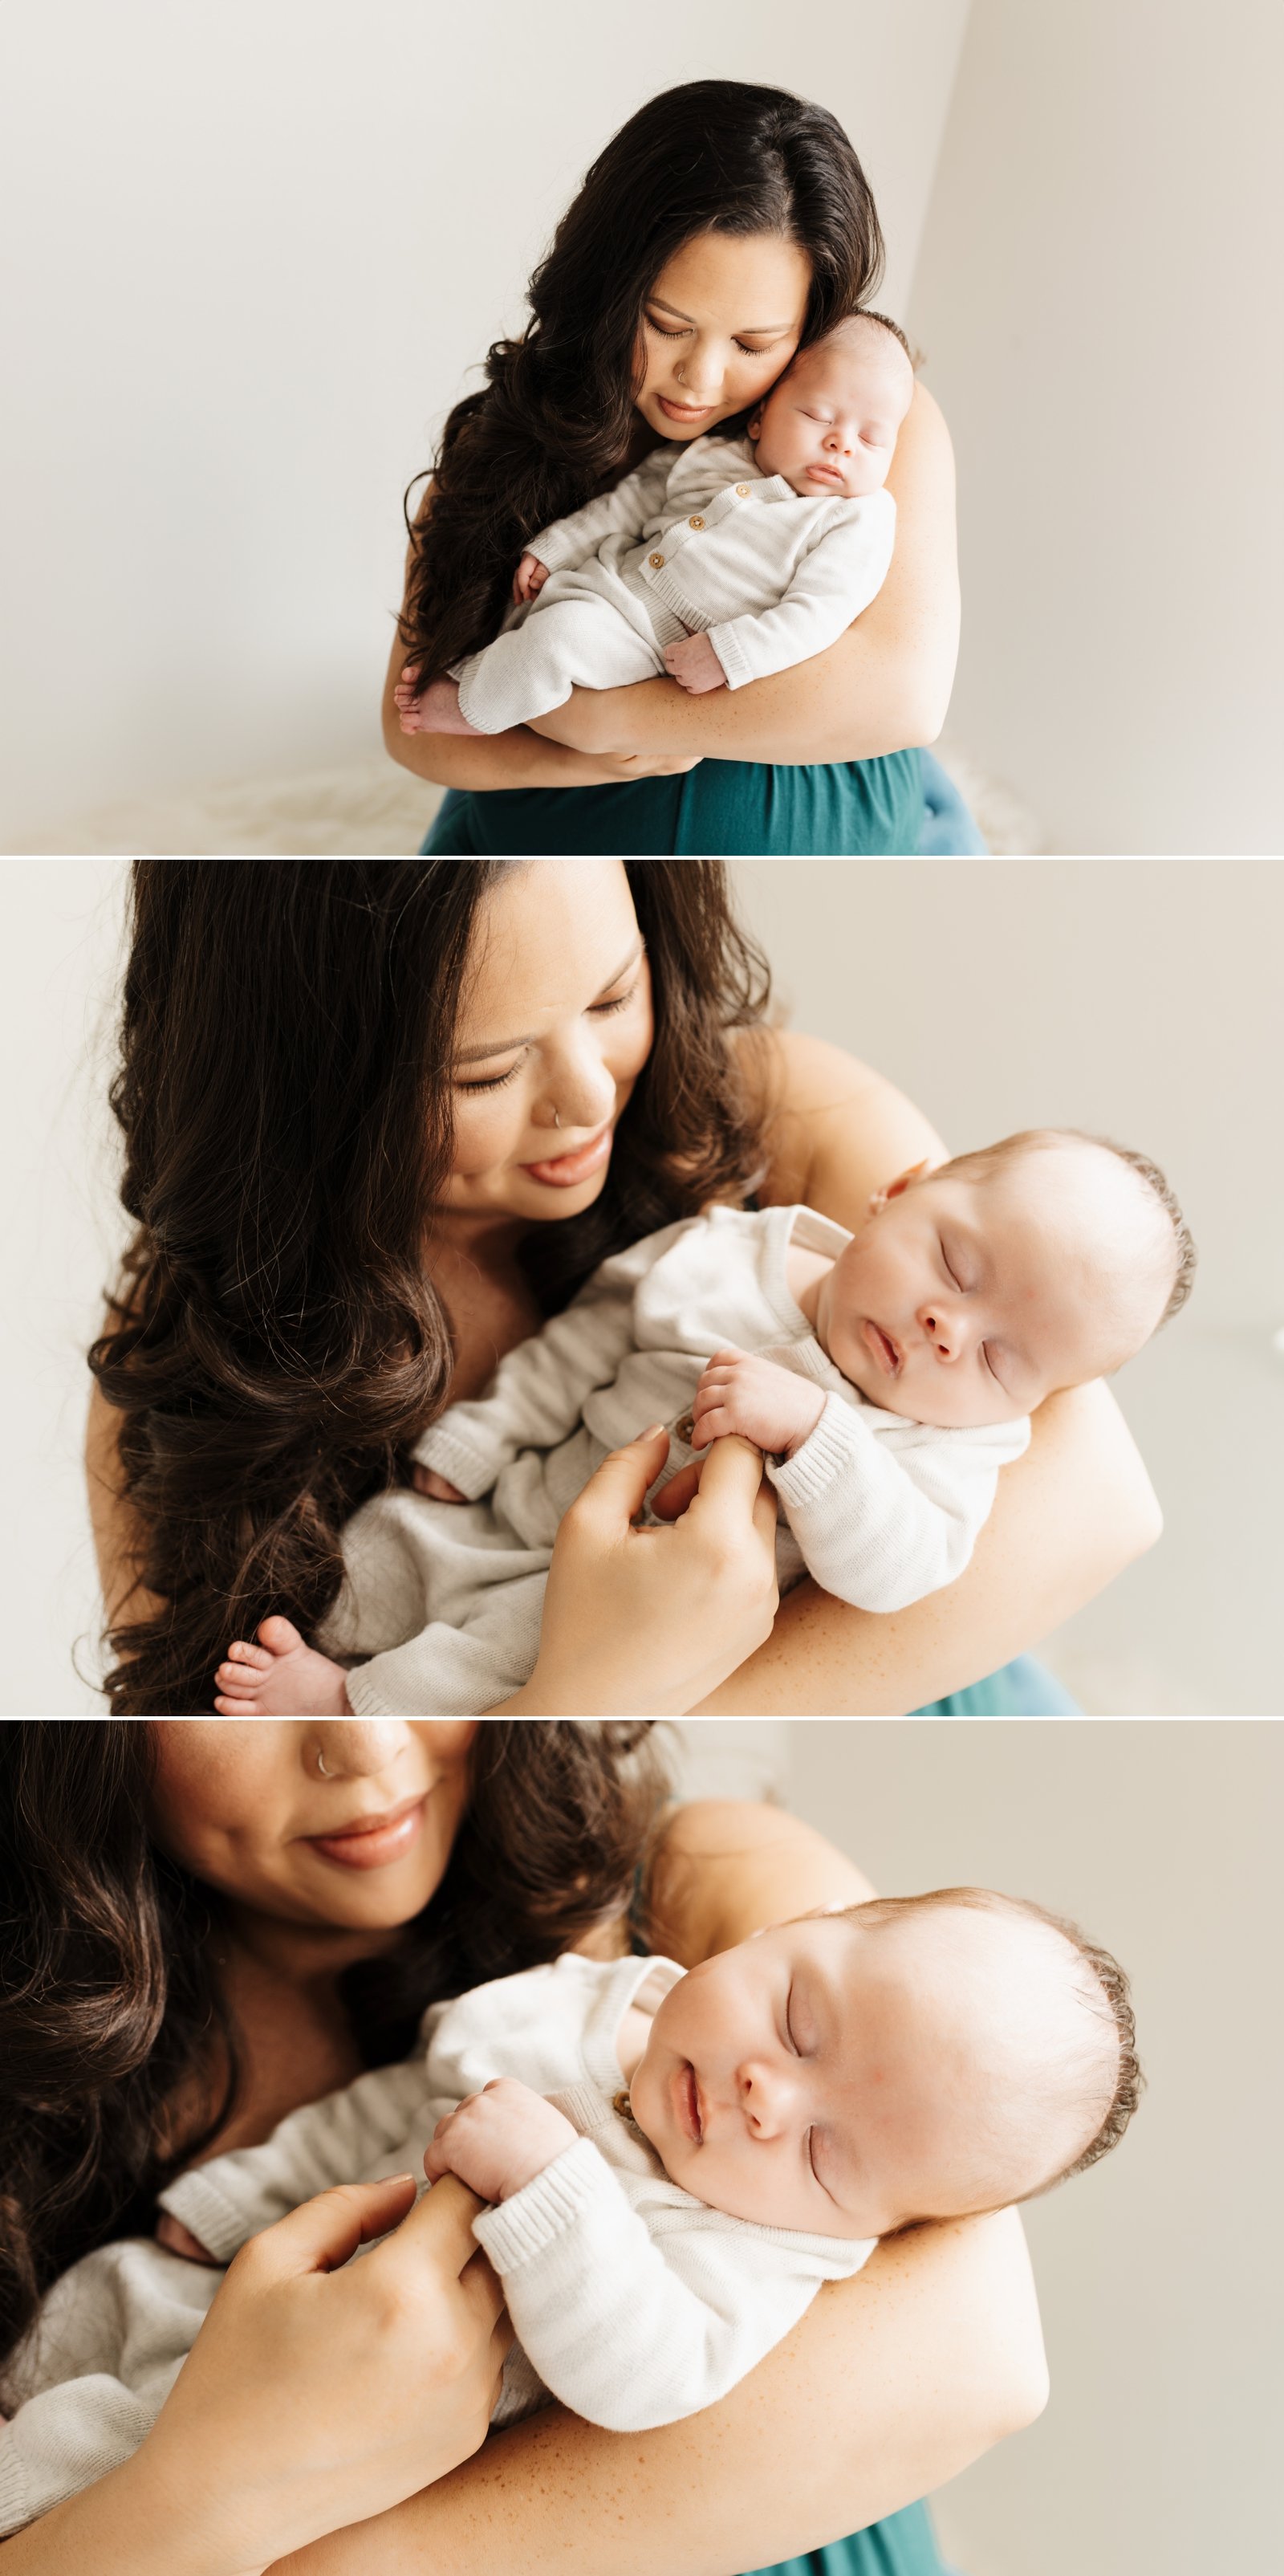 daly city at home newborn lifestyle photoshoot with sibling  4.jpg